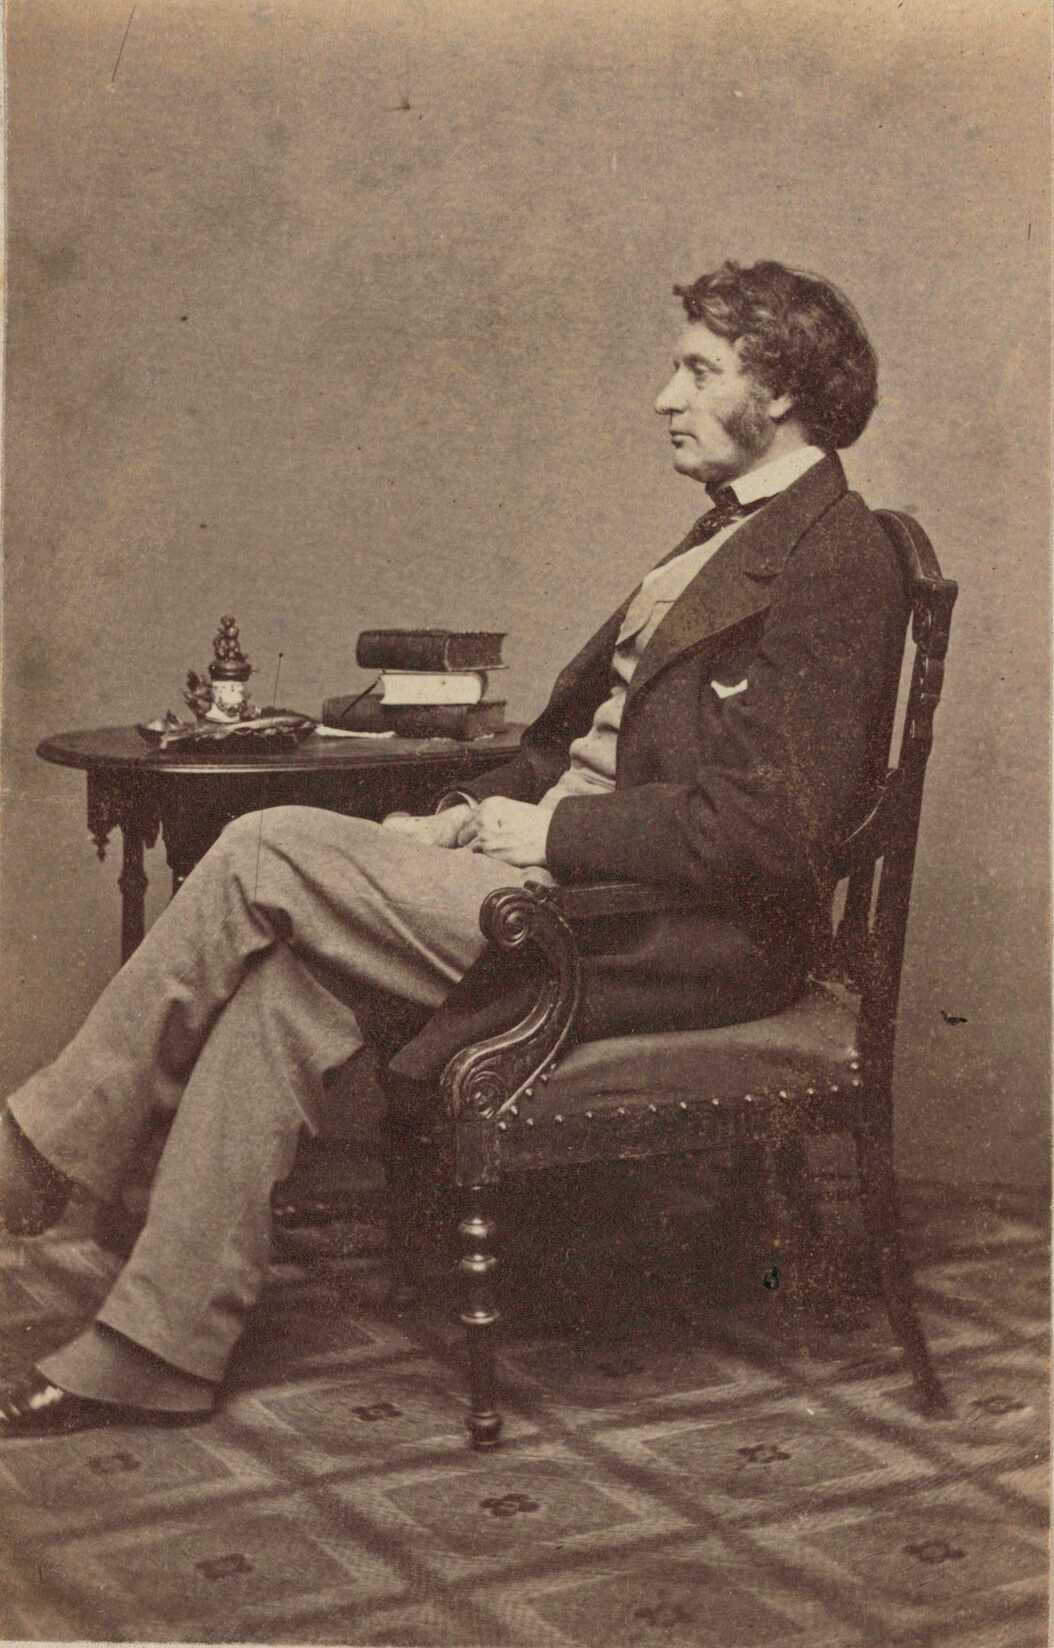 Carte-de-visite of Charles Sumner in full length seated profile. Sumner is pictured with his left profile facing the camera. His hands are resting in his lap and his left leg is crossed over his right leg at the knee. He is wearing a light colored vest and trousers with a white shirt, dark tie, and dark jacket. Spats peak out below his pant legs, partially covering his dark colored low-heeled shoes. His hair is moderately long and he has long sideburns. Sumner is seated in a carved armchair with an upholstered seat with a round wooden side table behind him. A stack of books, some loose papers, and possibly an inkstand are placed on the table. The floor of the room is covered in a geometric patterned carpet. There is a double-lined border printed in gold ink surrounding the outside edges of the card mount.

Printed on the back of the photograph is  E. and H.T. Anthony's mark.

The photograph is housed in the album 2017.30. The album page has a triple-lined, gold border framing the print. Handwritten in graphite in the bottom of the printed frame of the window on the album page is the text "Charles Sumner". Handwritten in the lower left corner of the album page in graphite is the name "E ANTHONY-BRADY".